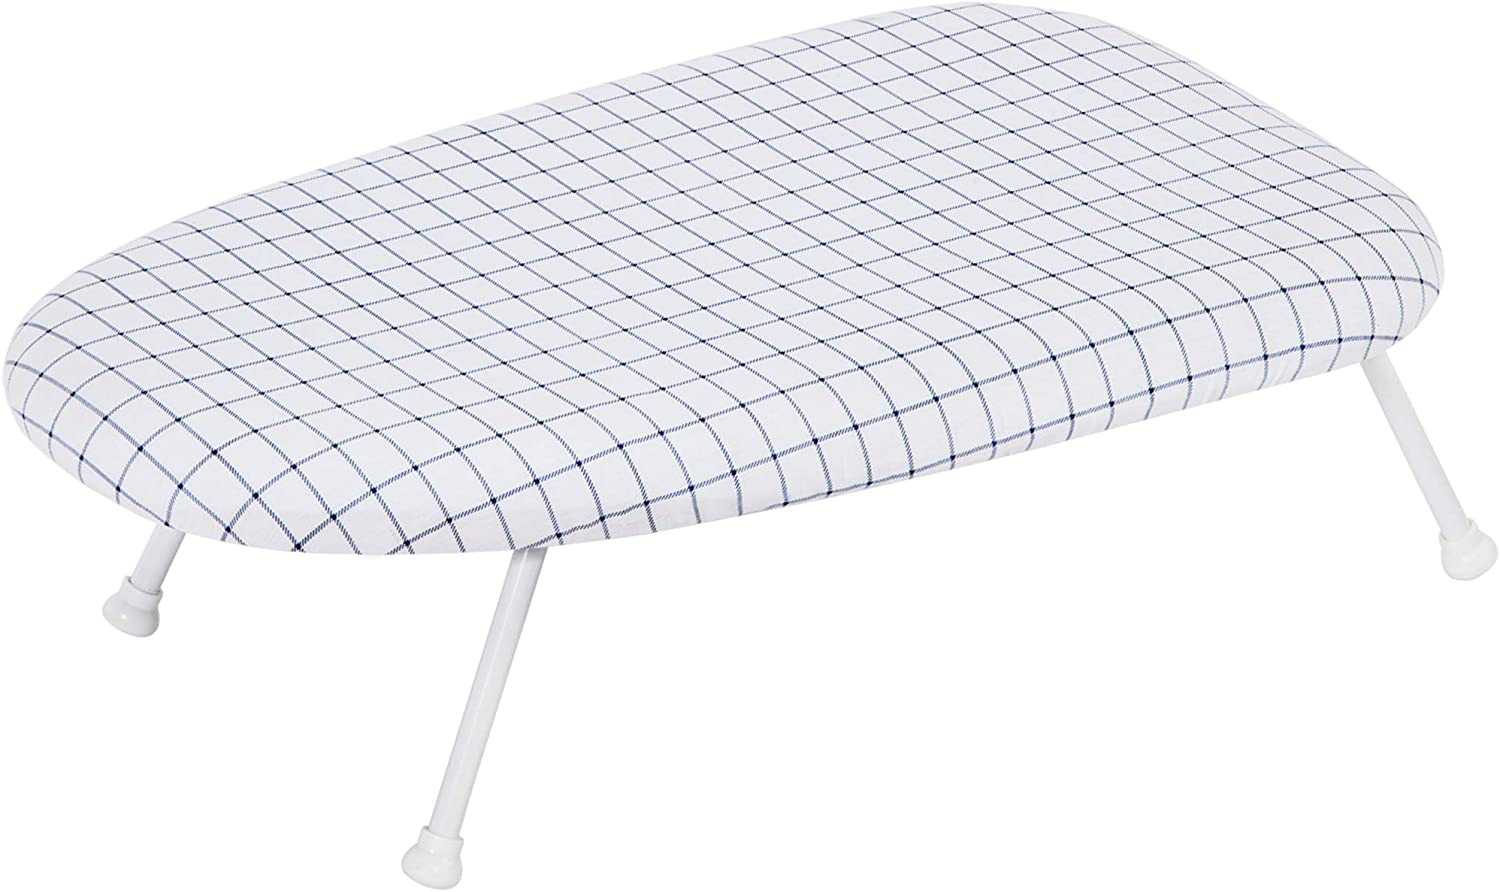 STORAGE MANIAC Tabletop Ironing Board with Folding Legs, Extra Wide Countertop Ironing Board with Cotton Cover, Portable Mini Ironing Board for Sewing, Craft Room, Household, Dorm, White